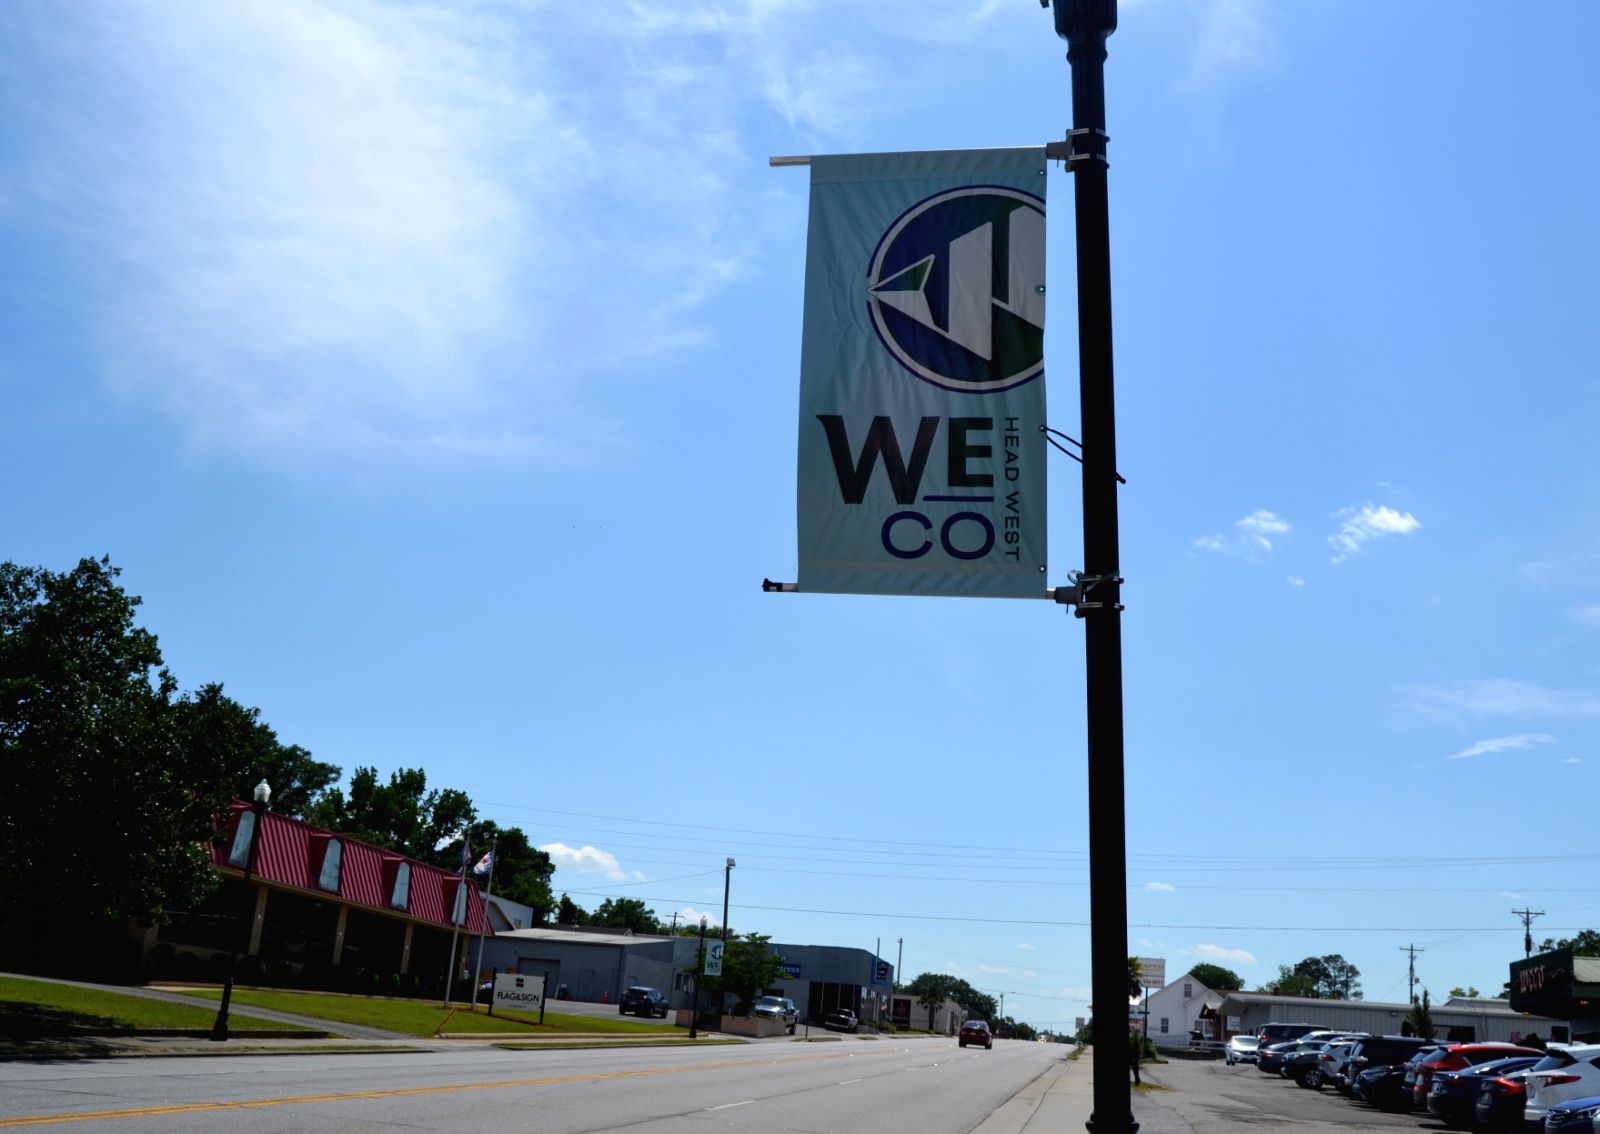 In 2020, West Columbia issued 154 new business licenses, and has issued 127 from January to April 2021. (Photo/Melinda Waldrop)